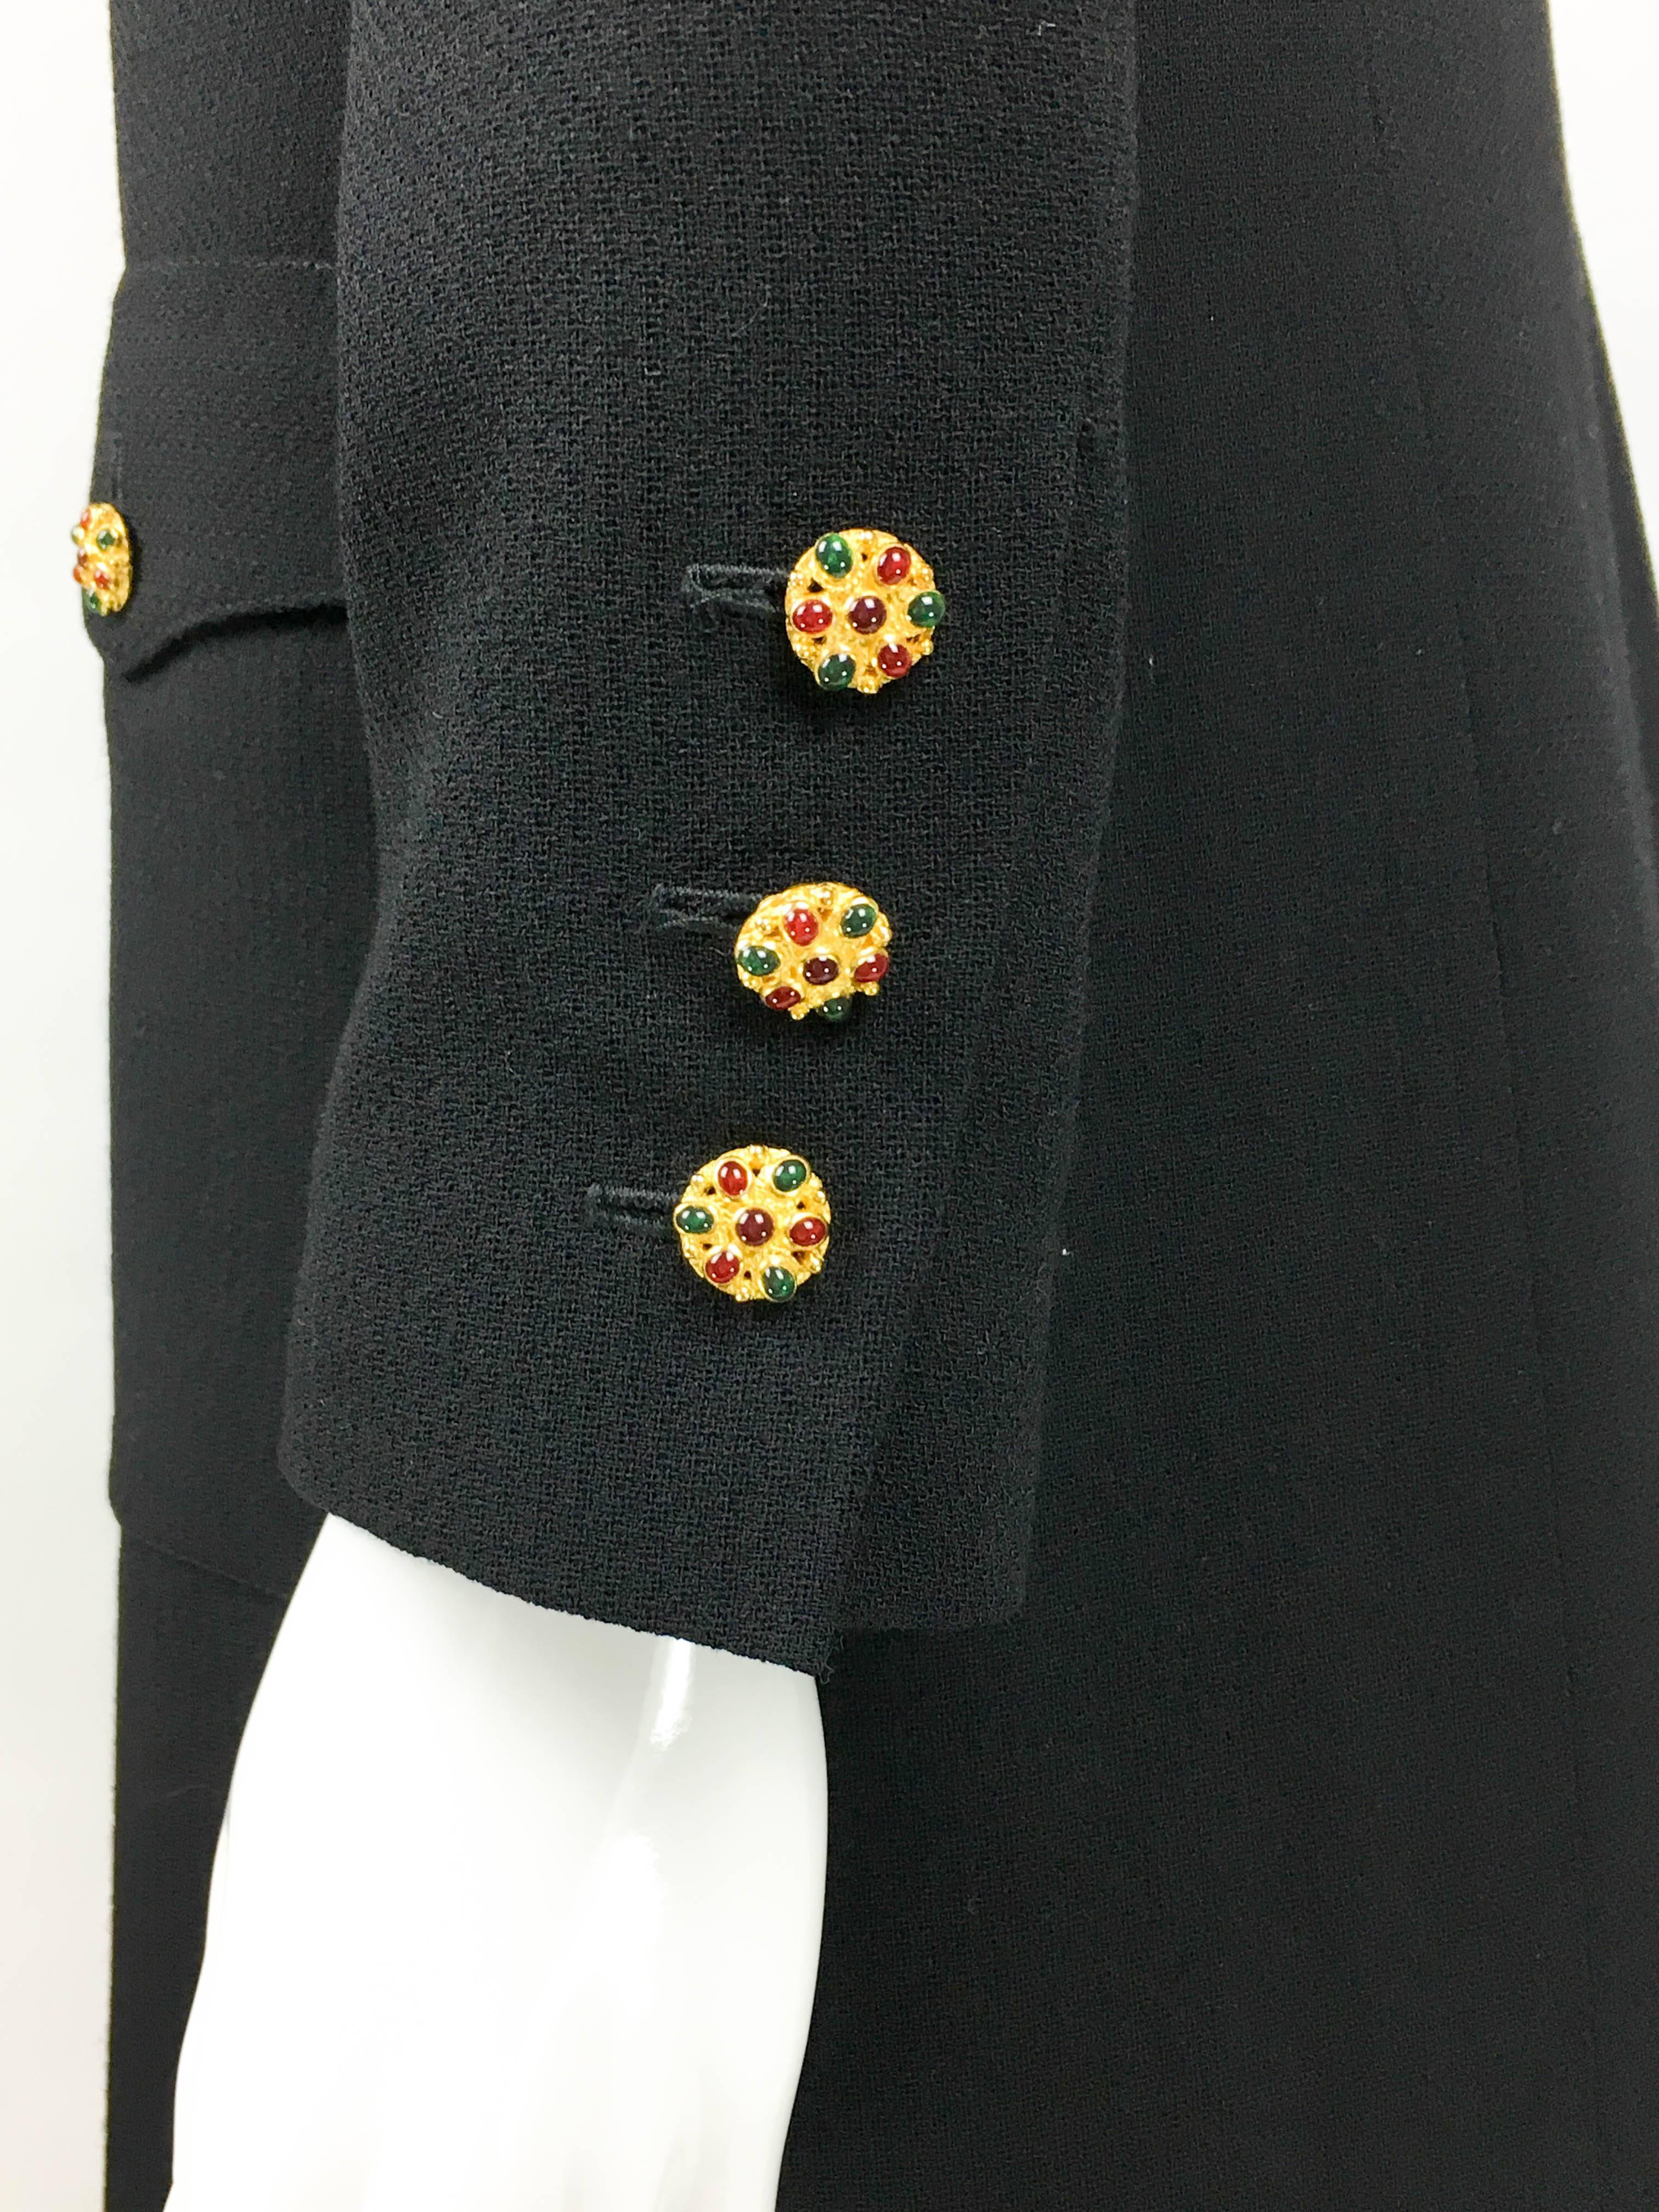 1996 Chanel Runway Look Black Wool Coat / Dress With Baroque-Style Buttons 4